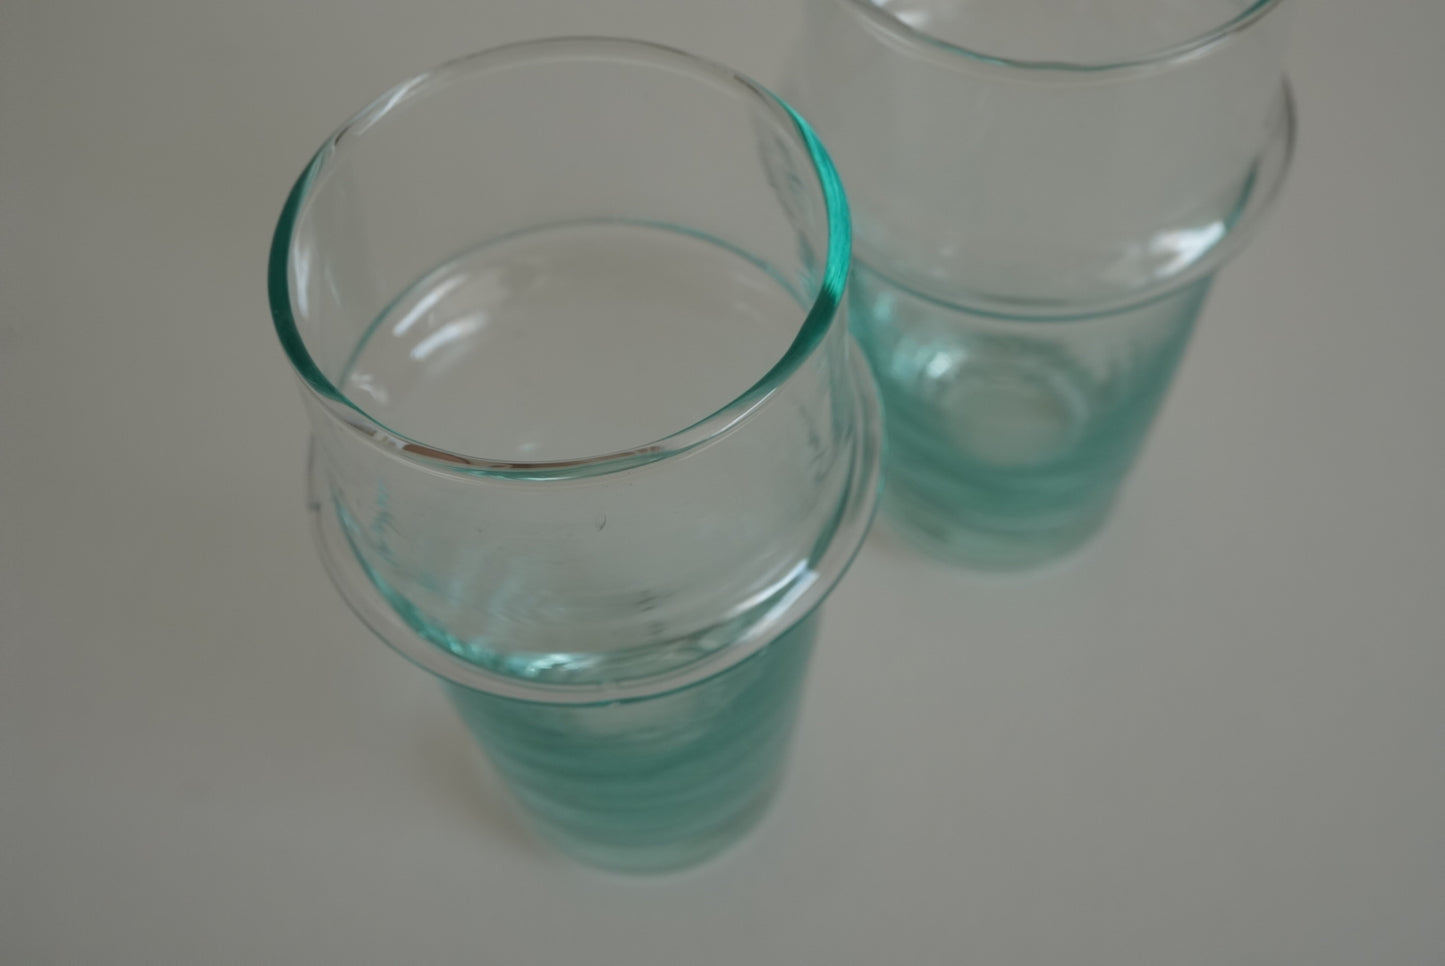 MOROCCO / Recycled glass / A / set of 2